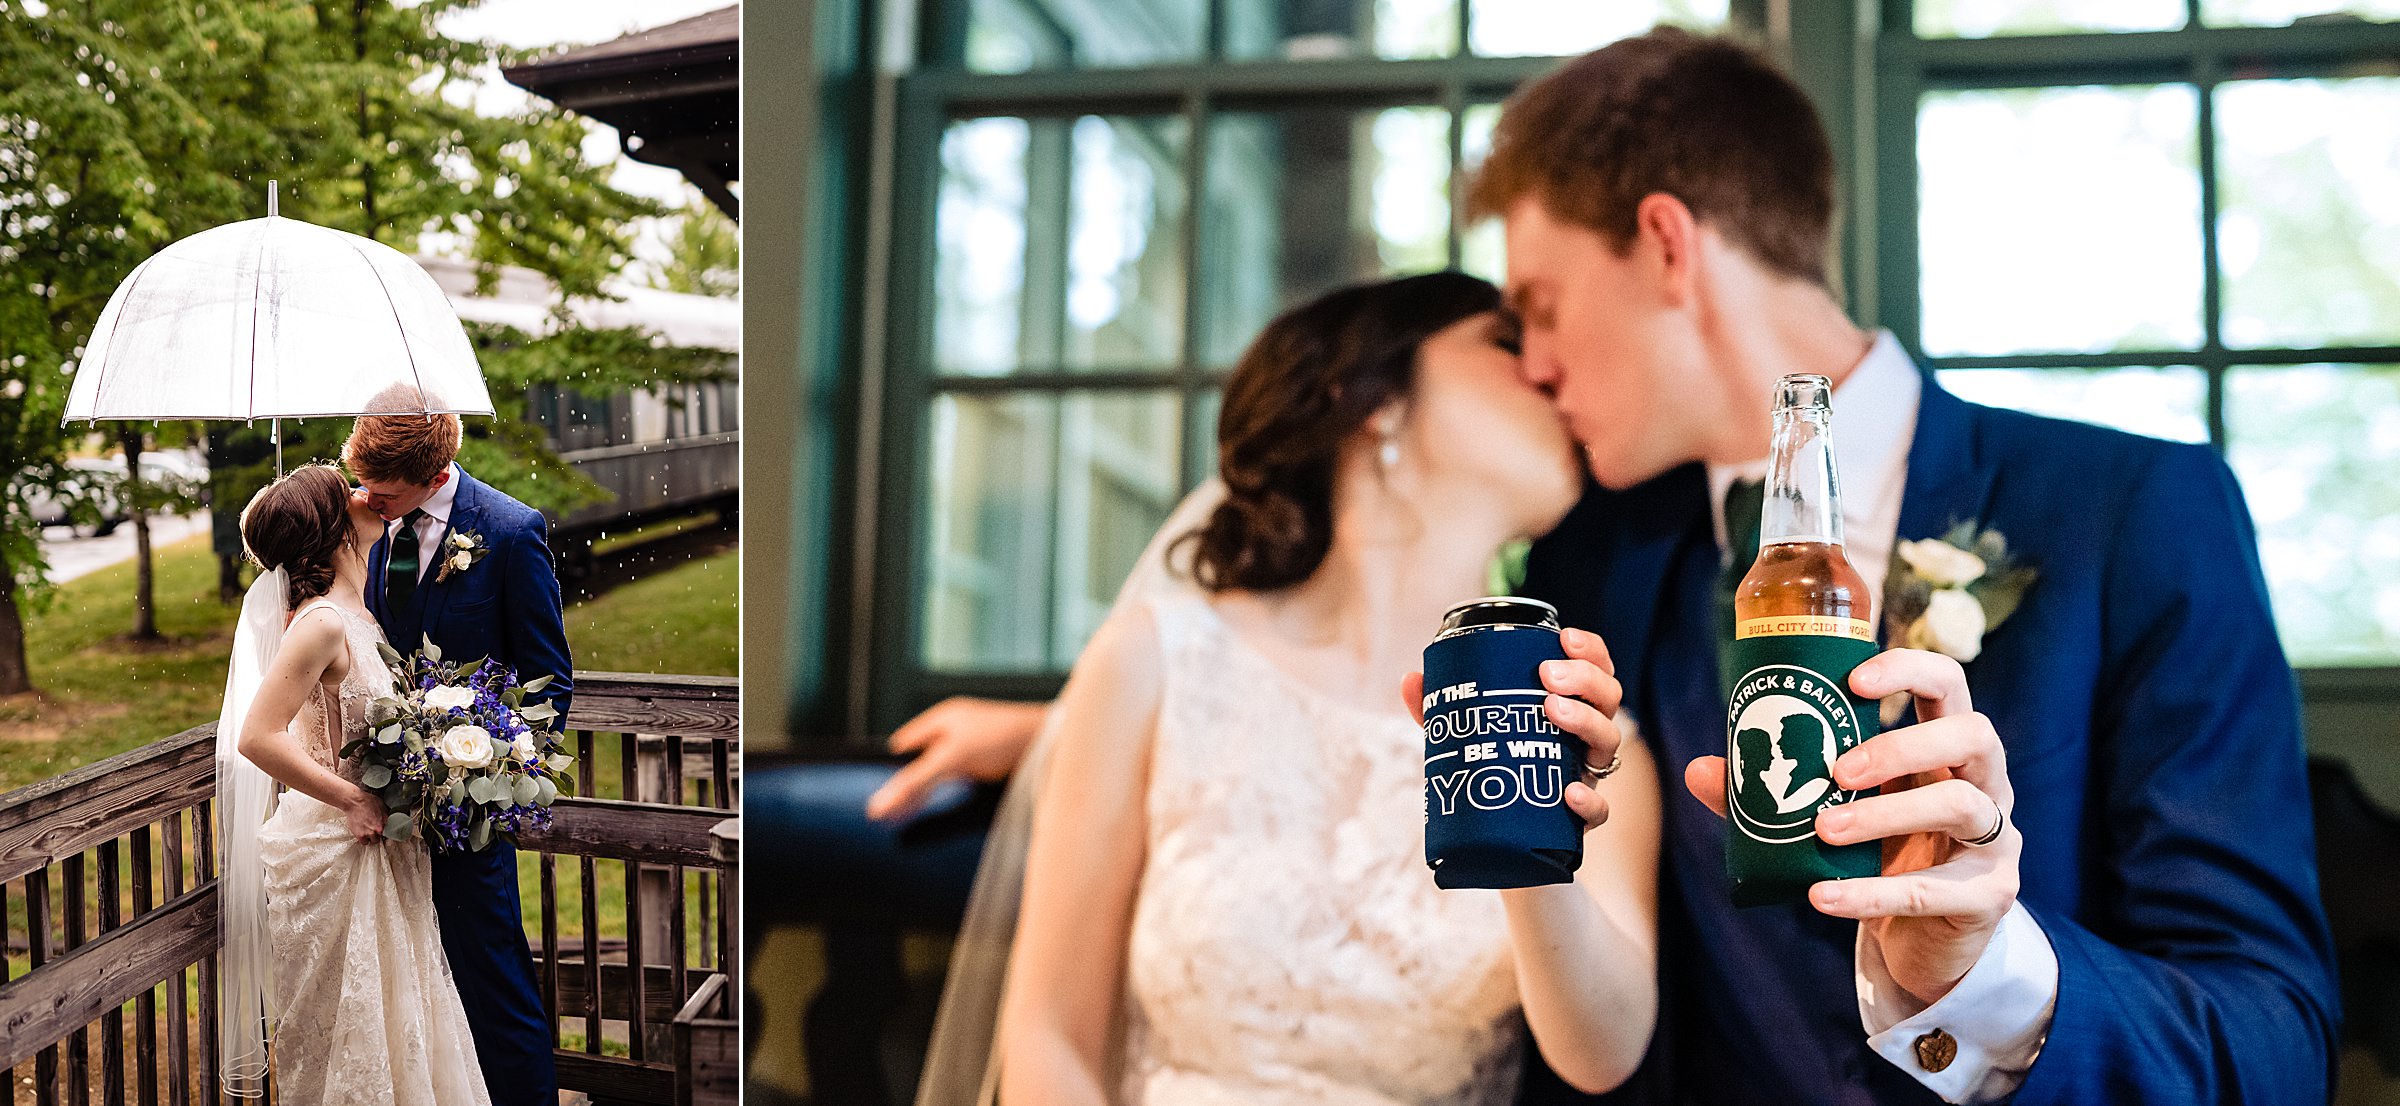 Bride and groom in rain and with coozies | Star Wars Wedding in North Carolina at Centennial Station in High Point | kivusandcamera.com